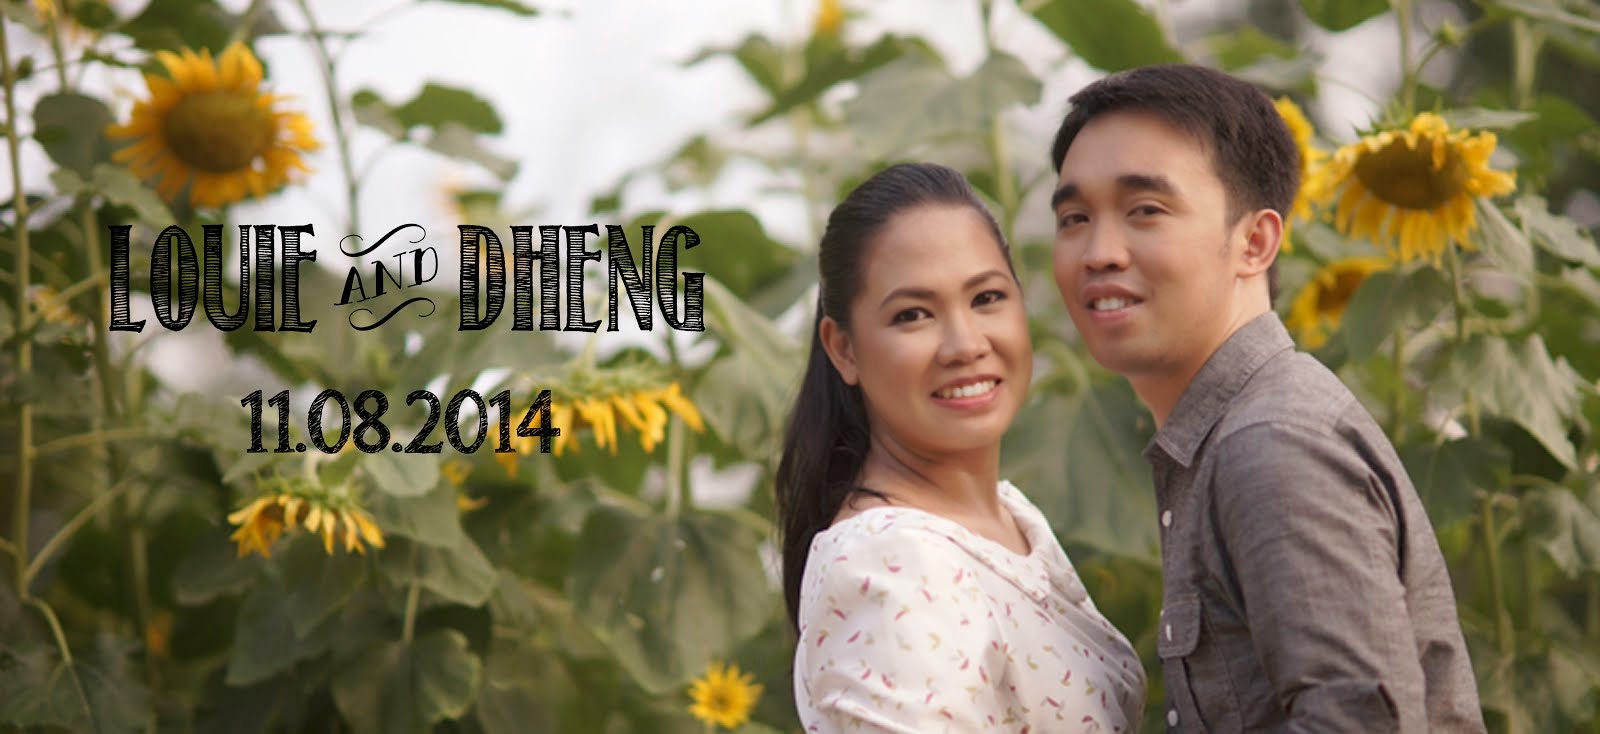 Louie and Dheng | 11.08.2014